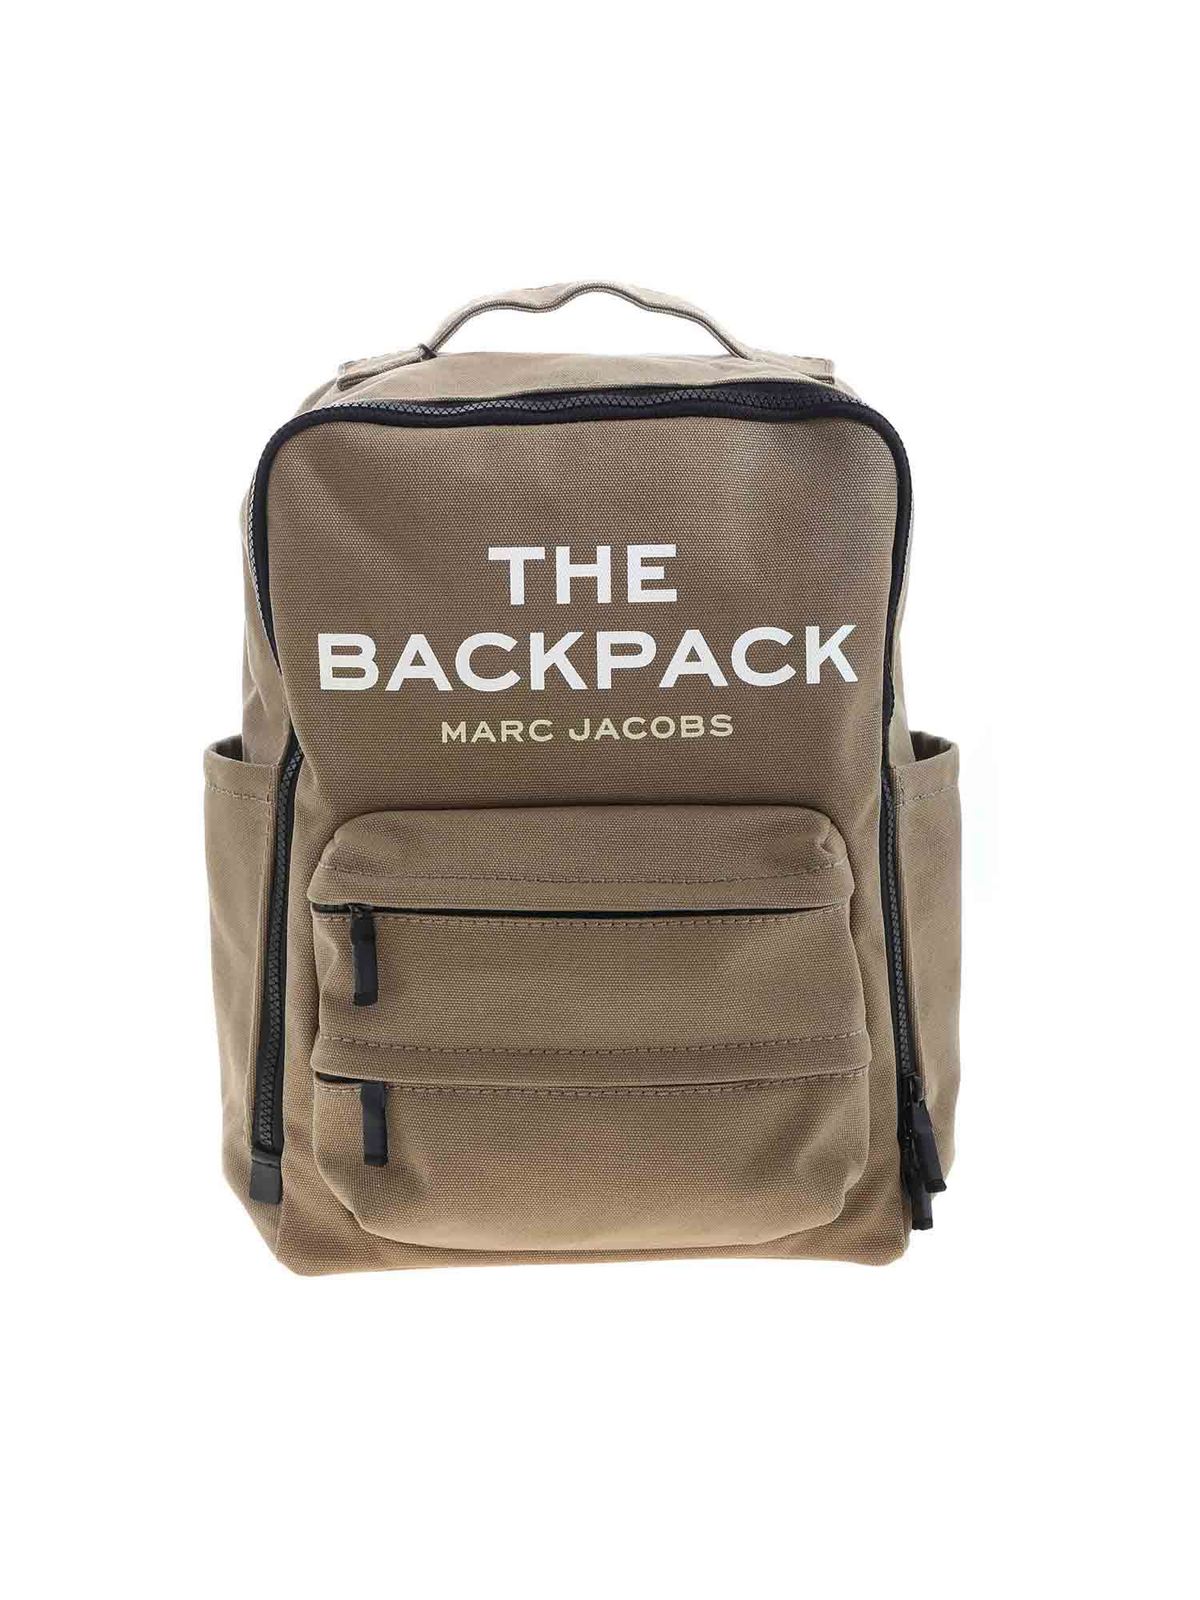 MARC JACOBS THE BACKPACK BACKPACK IN GREEN